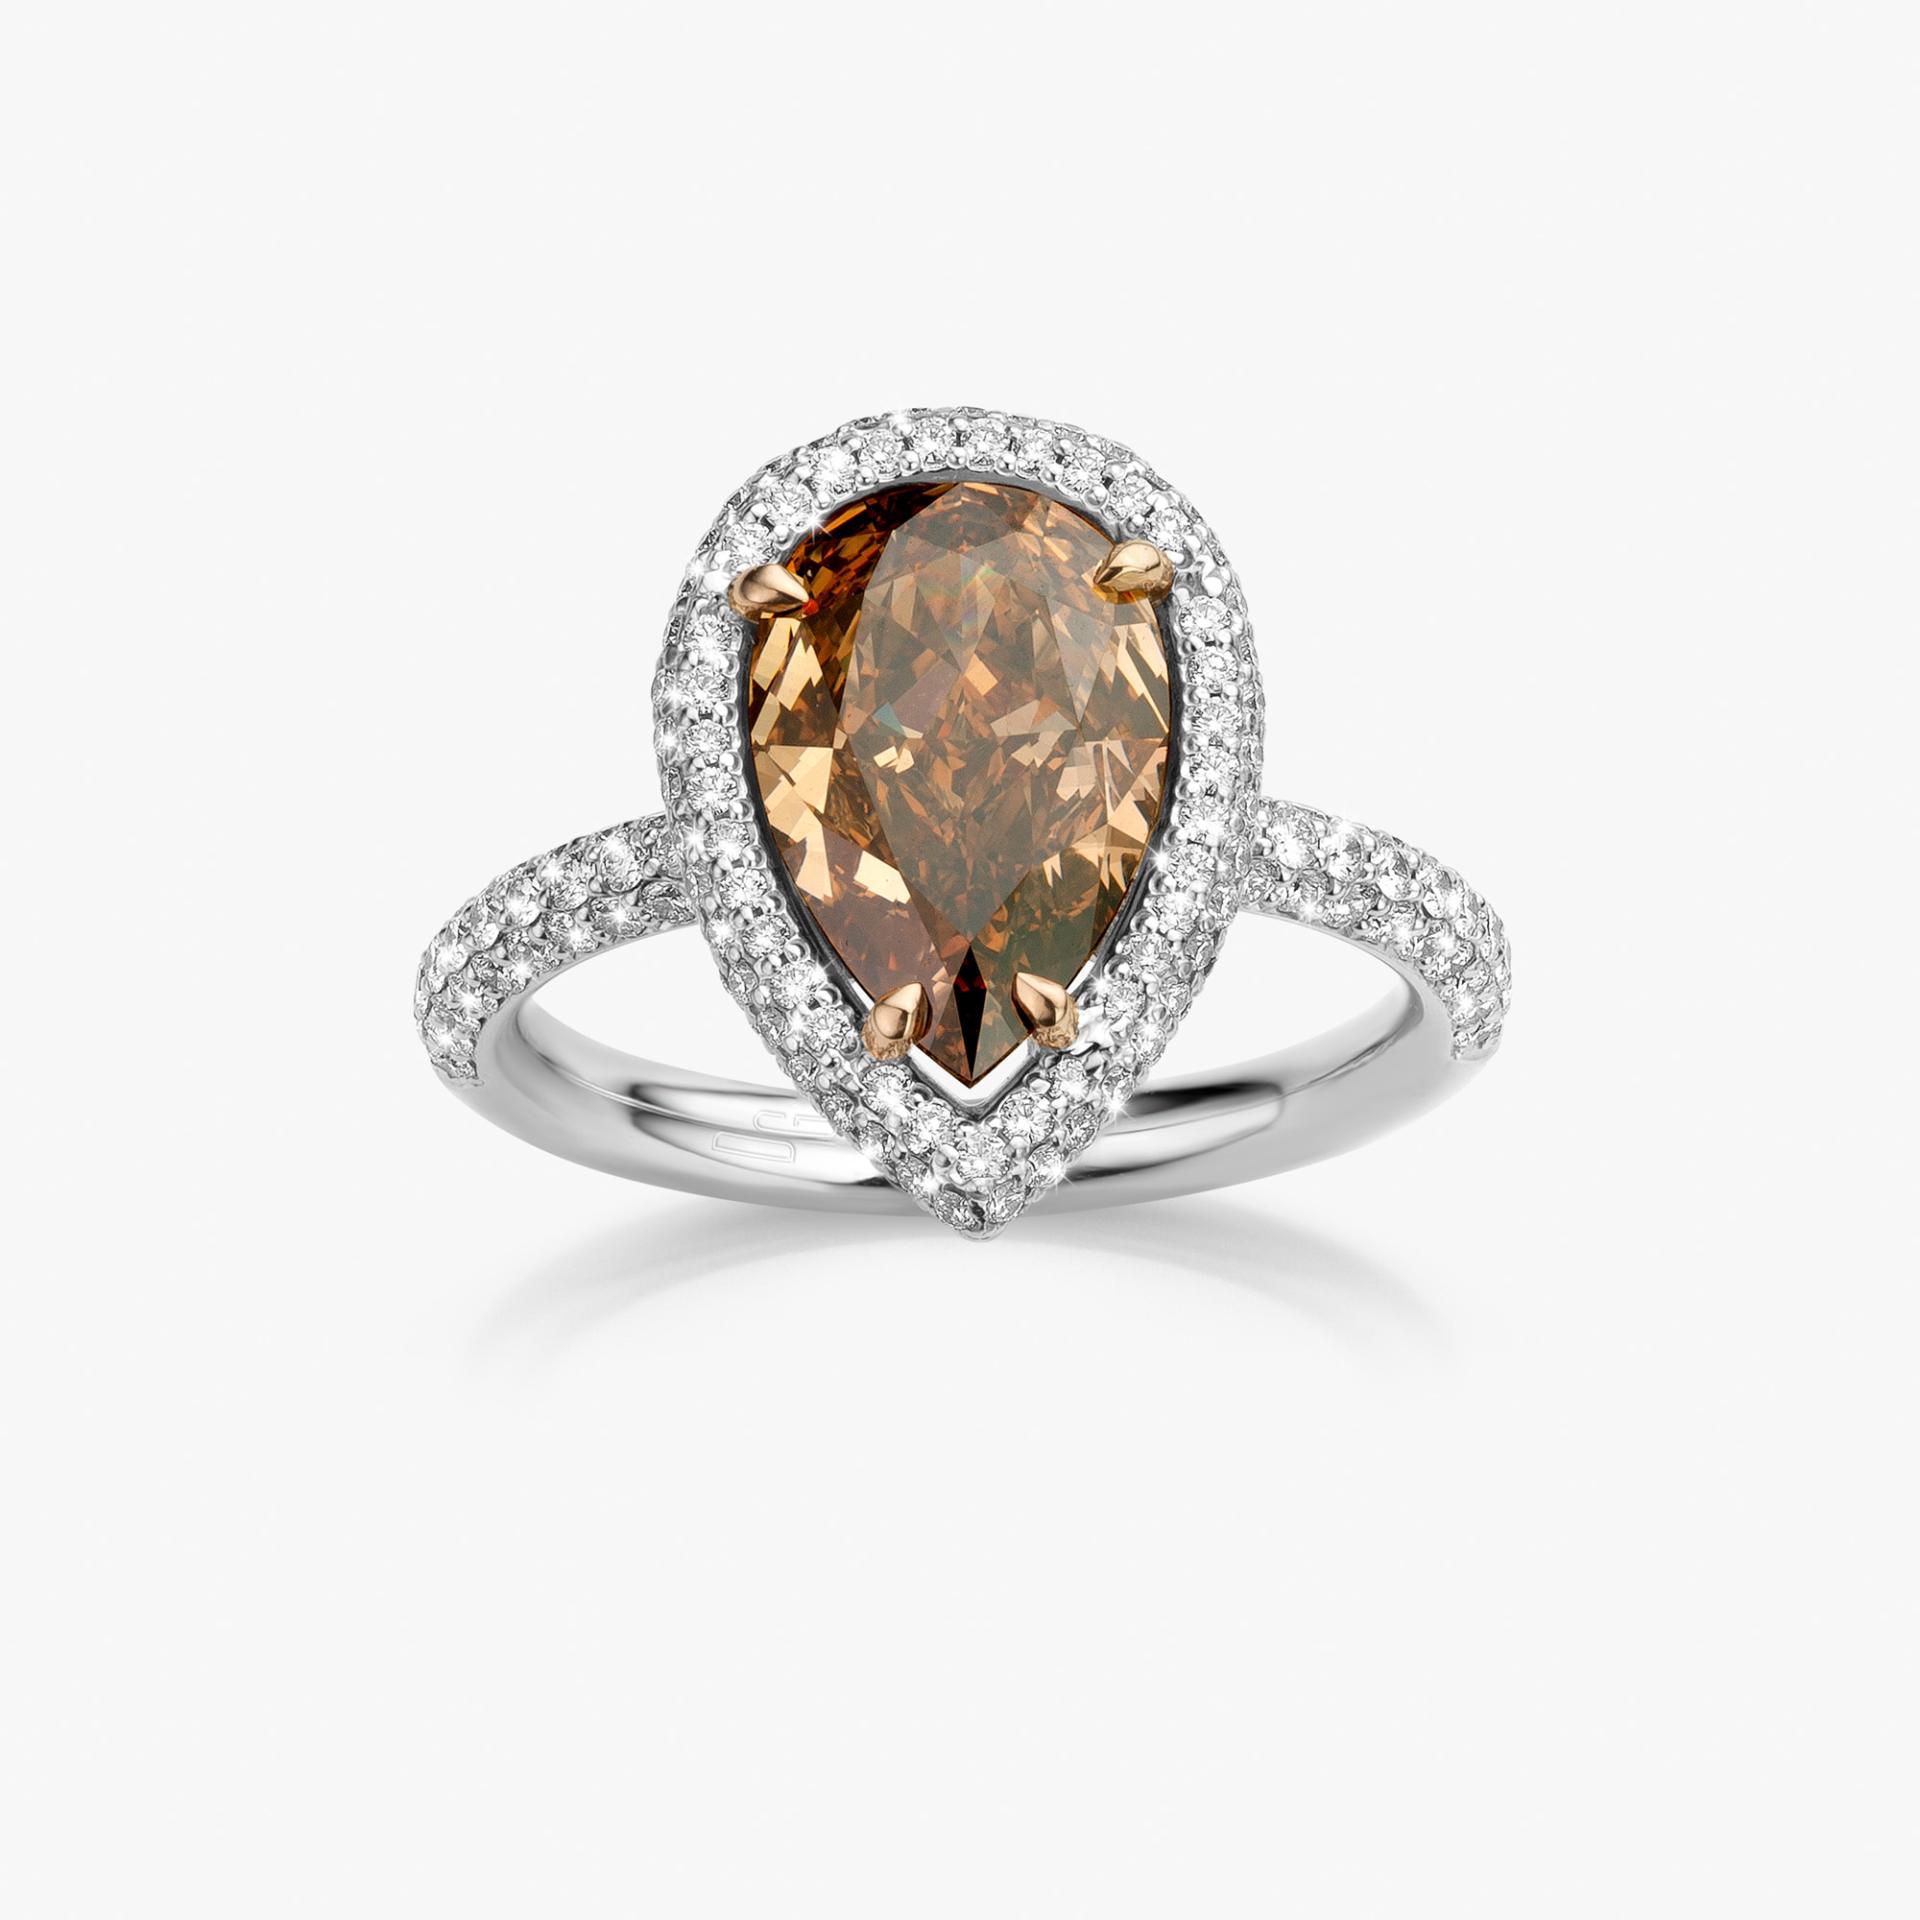 White gold ring set with pear shaped brown diamond and diamonds made by Maison De Greef